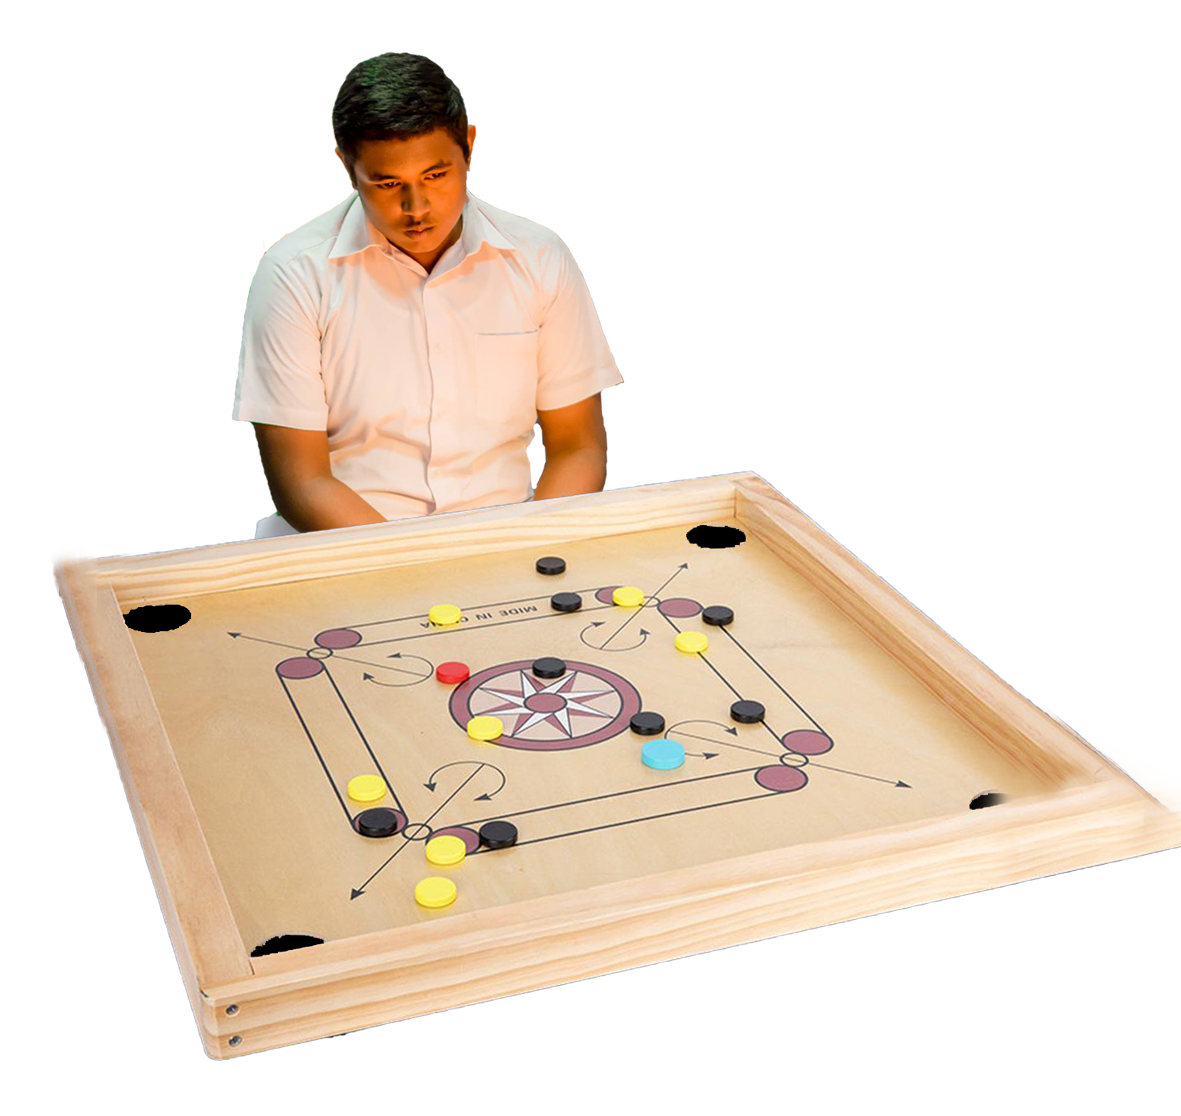 Royal carrom player thinking about next move